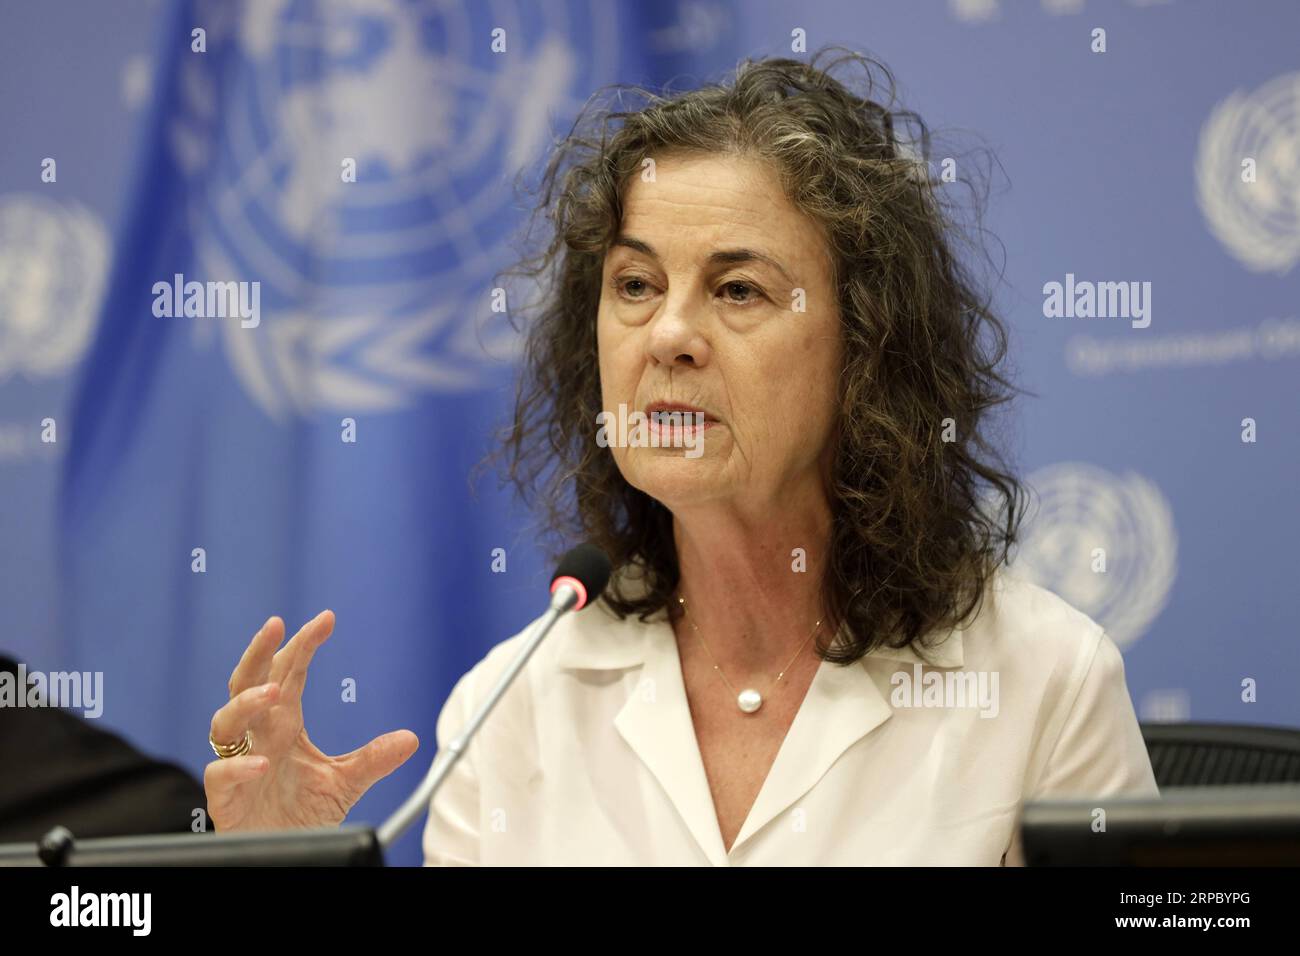 (190619) -- UNITED NATIONS, June 19, 2019 -- Ninette Kelley, Director of the New York Office of the United Nations High Commissioner for Refugees (UNHCR), briefs journalists at the UN headquarters in New York, June 19, 2019. Almost 70.8 million people were forcibly displaced in 2018, with a 2.3-million increase compared to the previous year, according to the annual Global Trends report released ahead of the World Refugee Day by the United Nations Refugee Agency. ) UN-UNHCR-PRESS BRIEFING LixMuzi PUBLICATIONxNOTxINxCHN Stock Photo